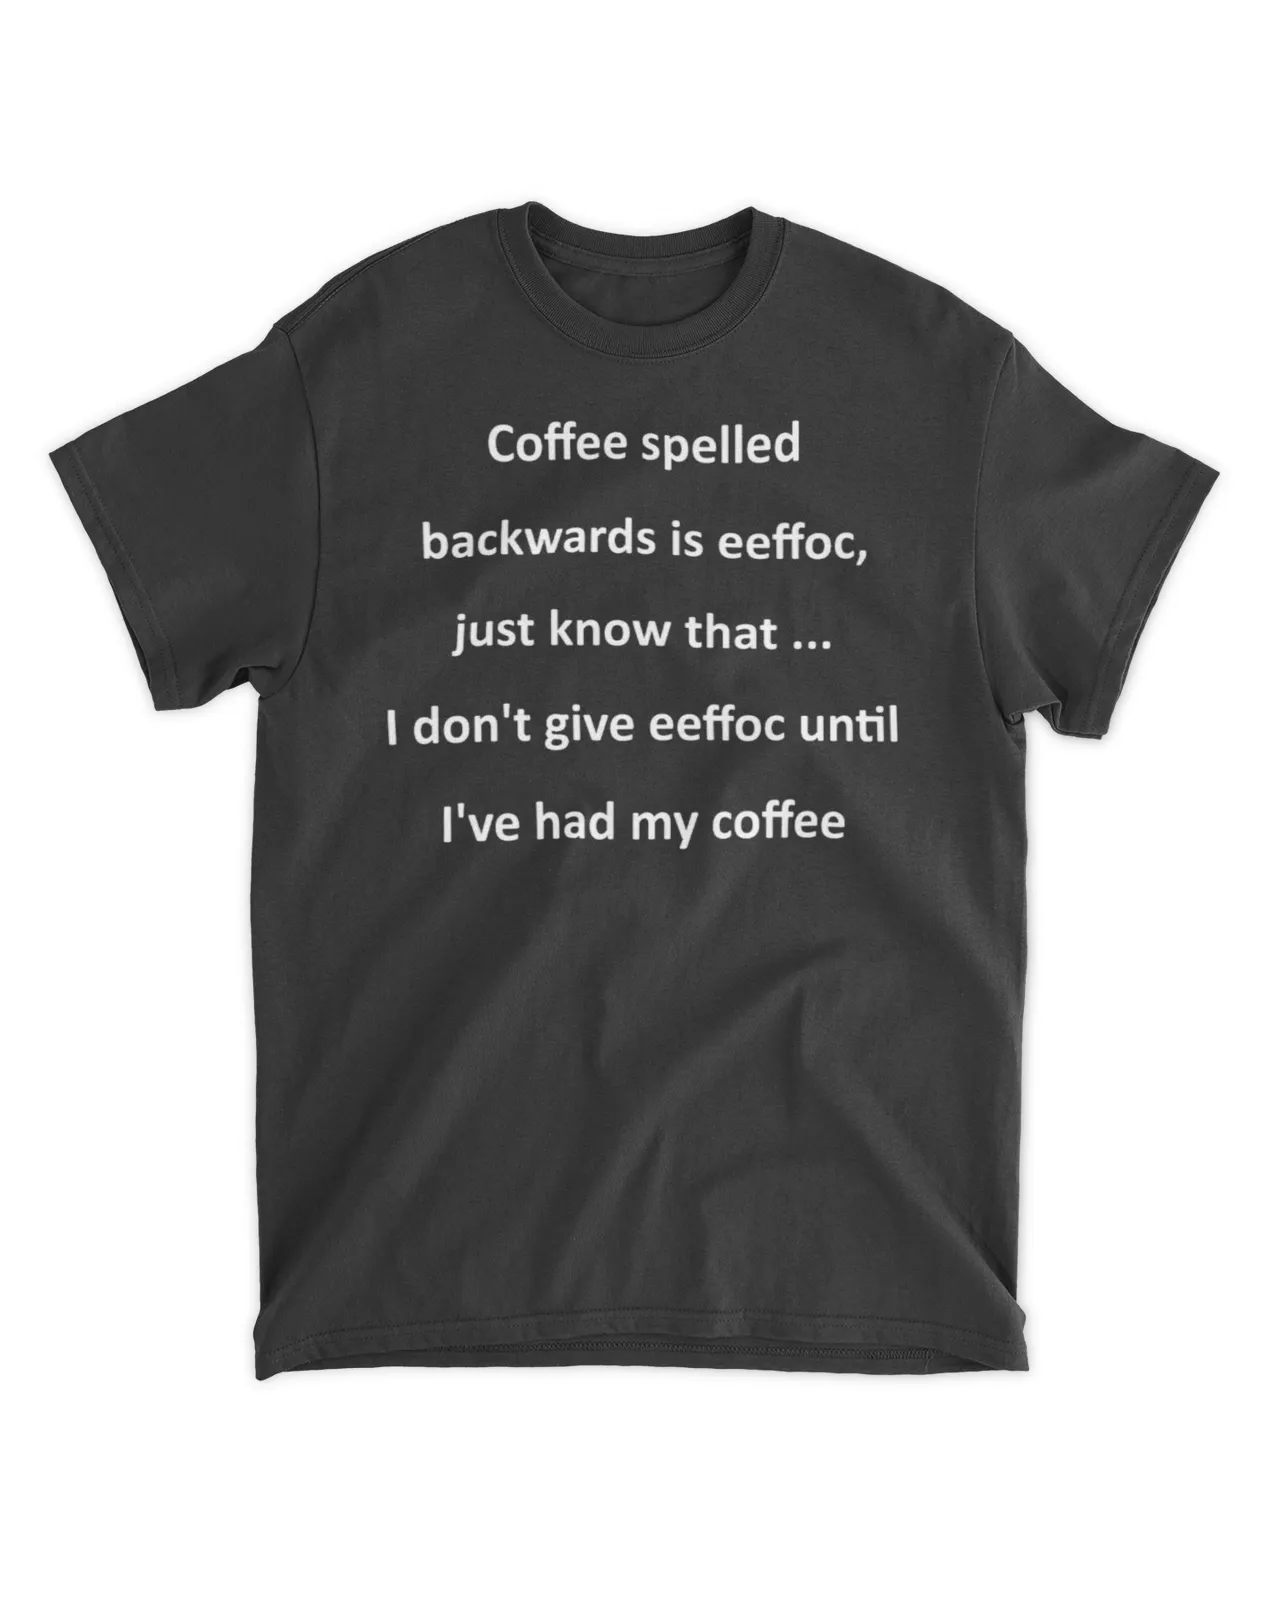  Coffee spelled backwards is eeffoc just know that I don't give eeffoc until I've had my coffee shirt